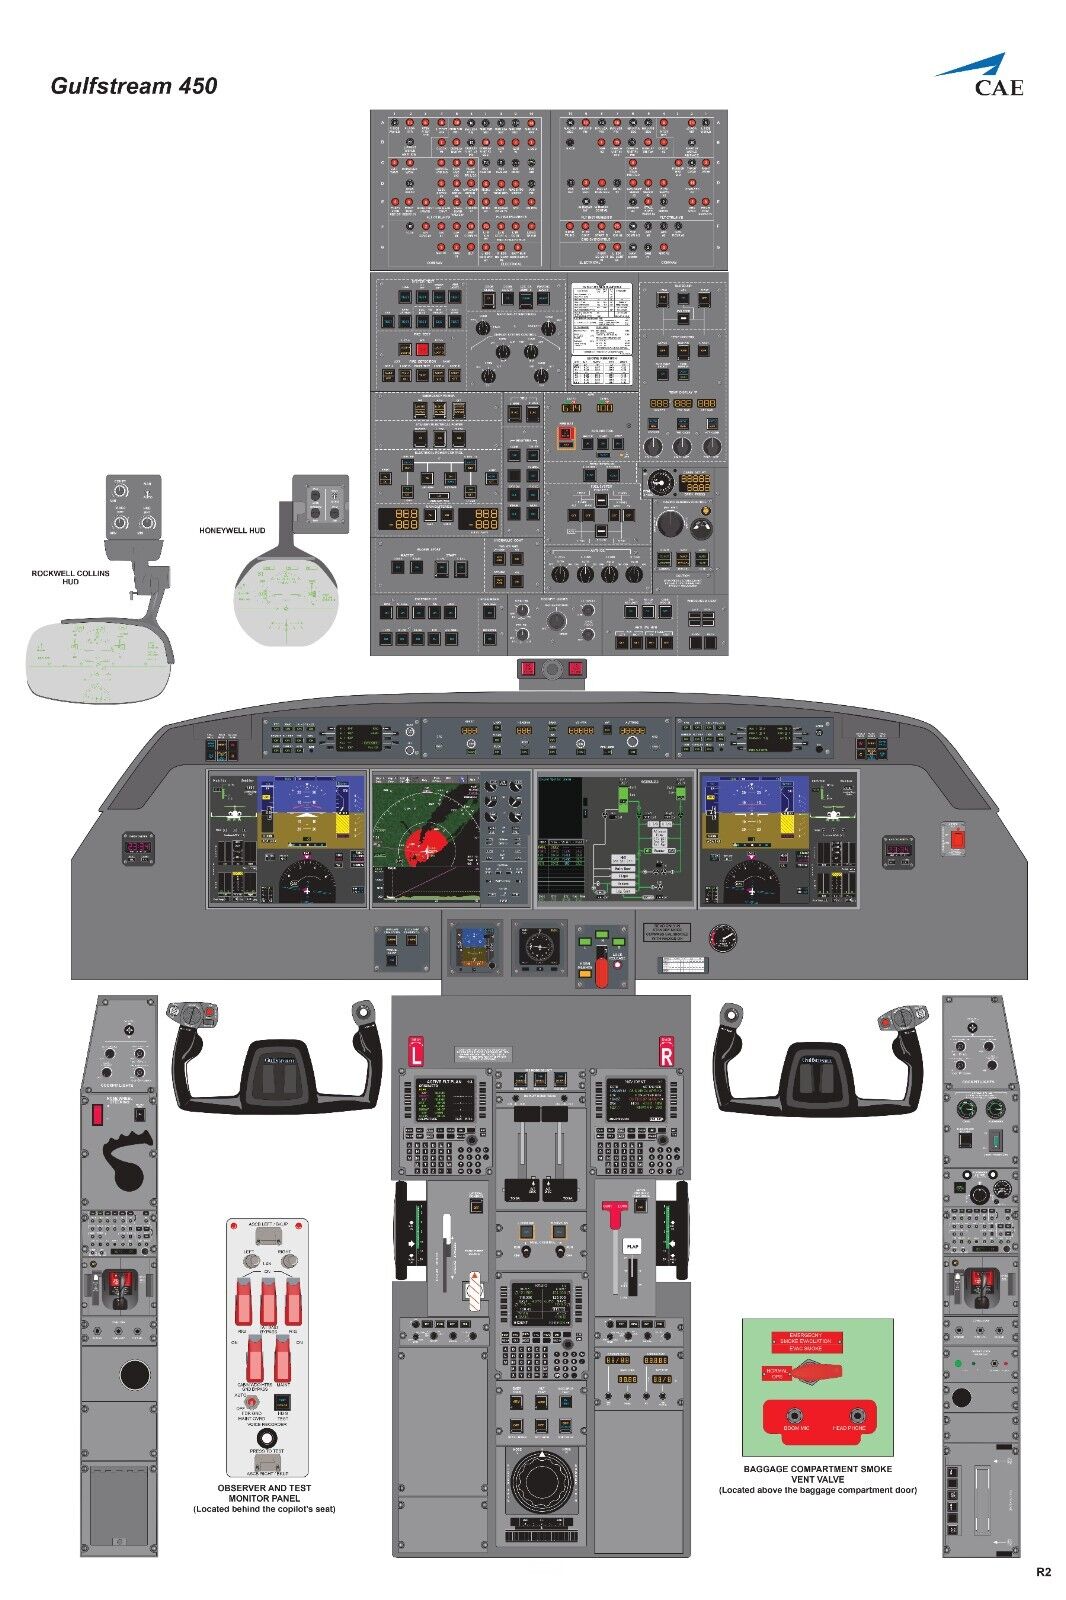 Gulfstream G450 Jet Aircraft Cockpit Poster 24in x 36in